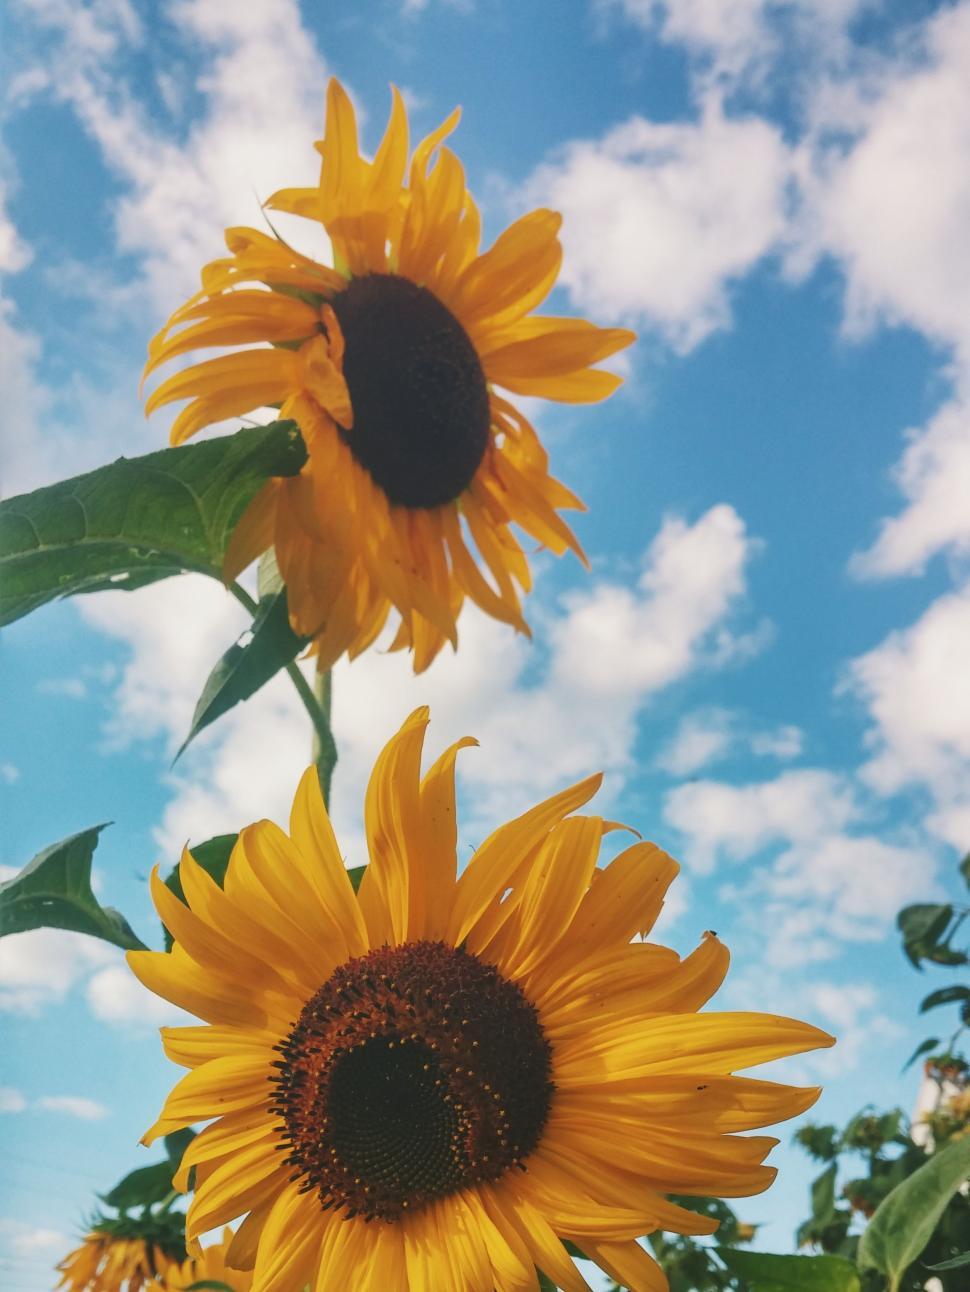 Free Image of Three Sunflowers Standing Tall in Field Under Blue Sky 